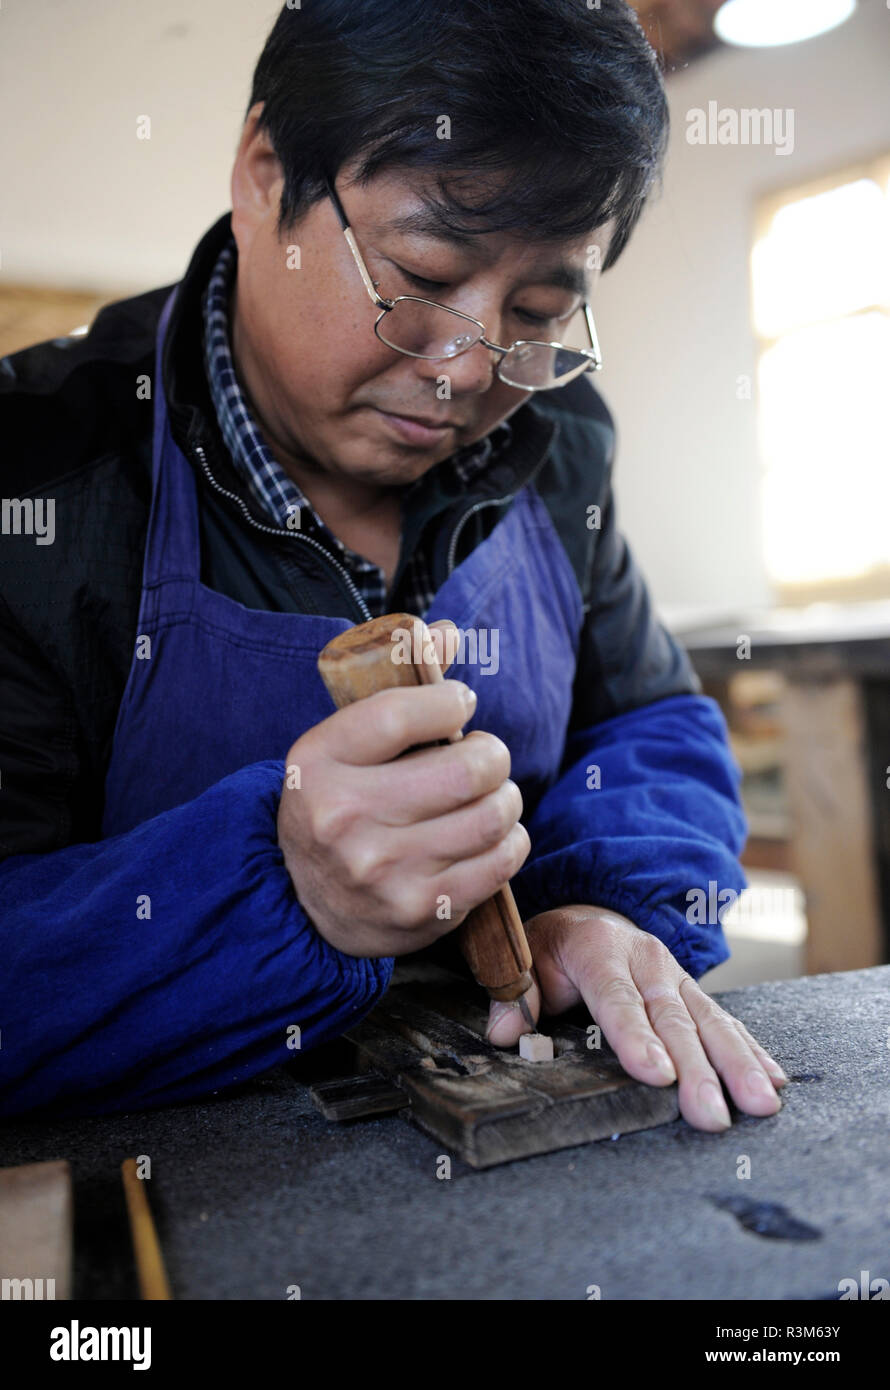 (181124) -- JINGXIAN, Nov. 24, 2018 (Xinhua) -- Lei Shitai works in Chanshan Village of Qinxi Town, Jingxian County, in east China's Anhui Province, Nov. 23, 2018. Lei, 52, born in neighboring Jiangxi Province, started his career as a typography printer when he finished his apprenticeship with his uncle who he followed since he was 17. The traditional printing method witnessed an increasingly hard time in the recent years as a livelihood. It was in 2017 when he decided to move to Chanshan at the invitation of Kai Yuanhong, a local cabinet maker, to cooperate in a broader way. Lei is now workin Stock Photo